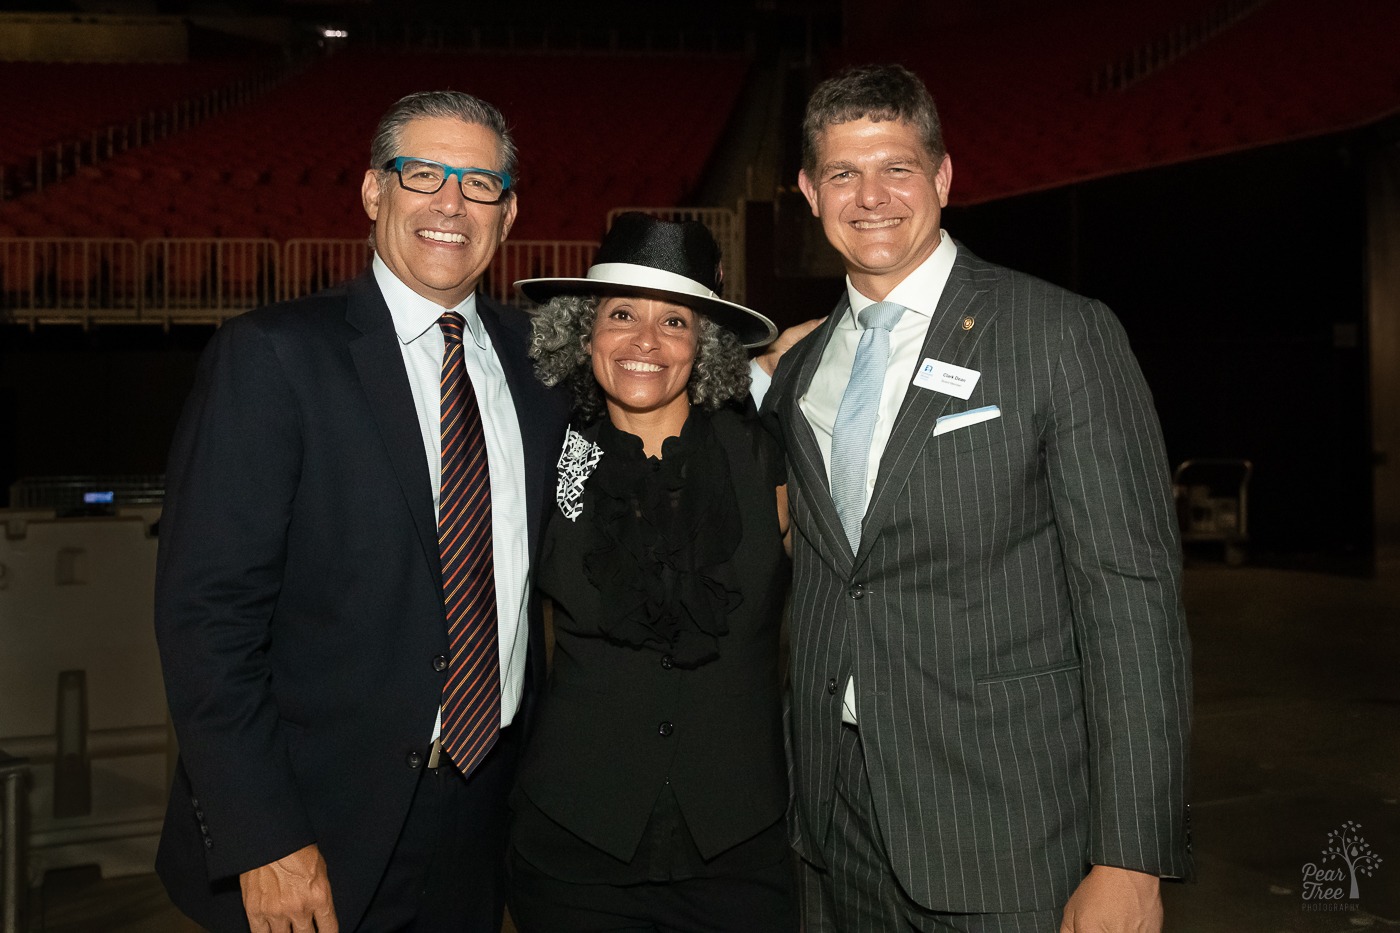 Ben Deutsch, Dr. Alie Redd, and Clark Dean standing close and smiling. After Night of Broadway Stars event for Covenant House Georgia inside Atlanta's Mercedes Benz stadium